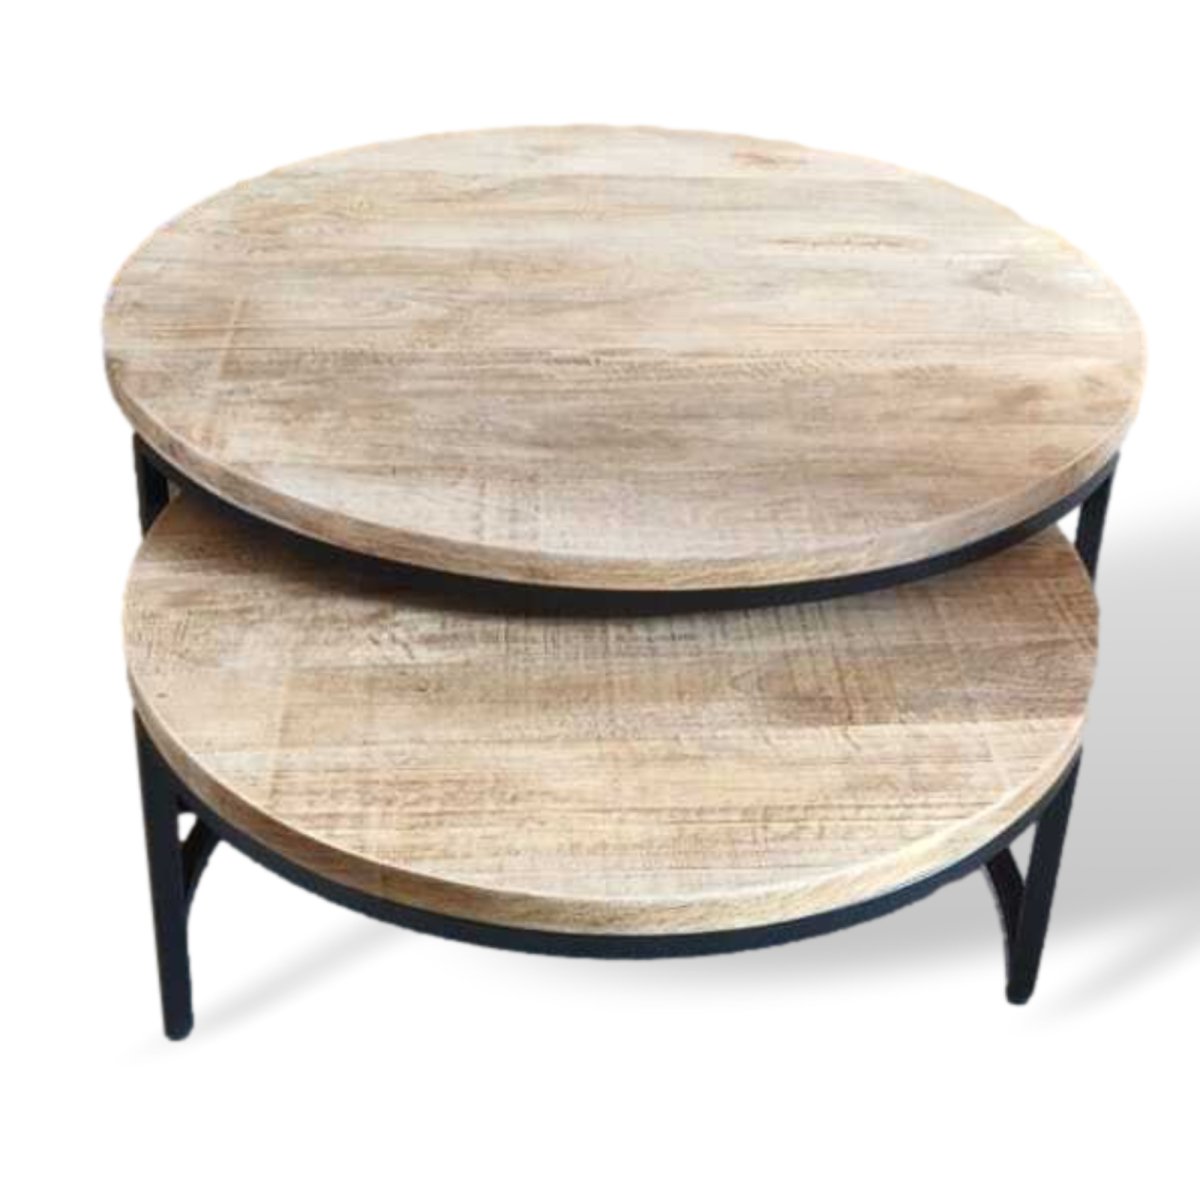 Enri 35 inch round coffee tables (set of 2) - Rustic Furniture Outlet